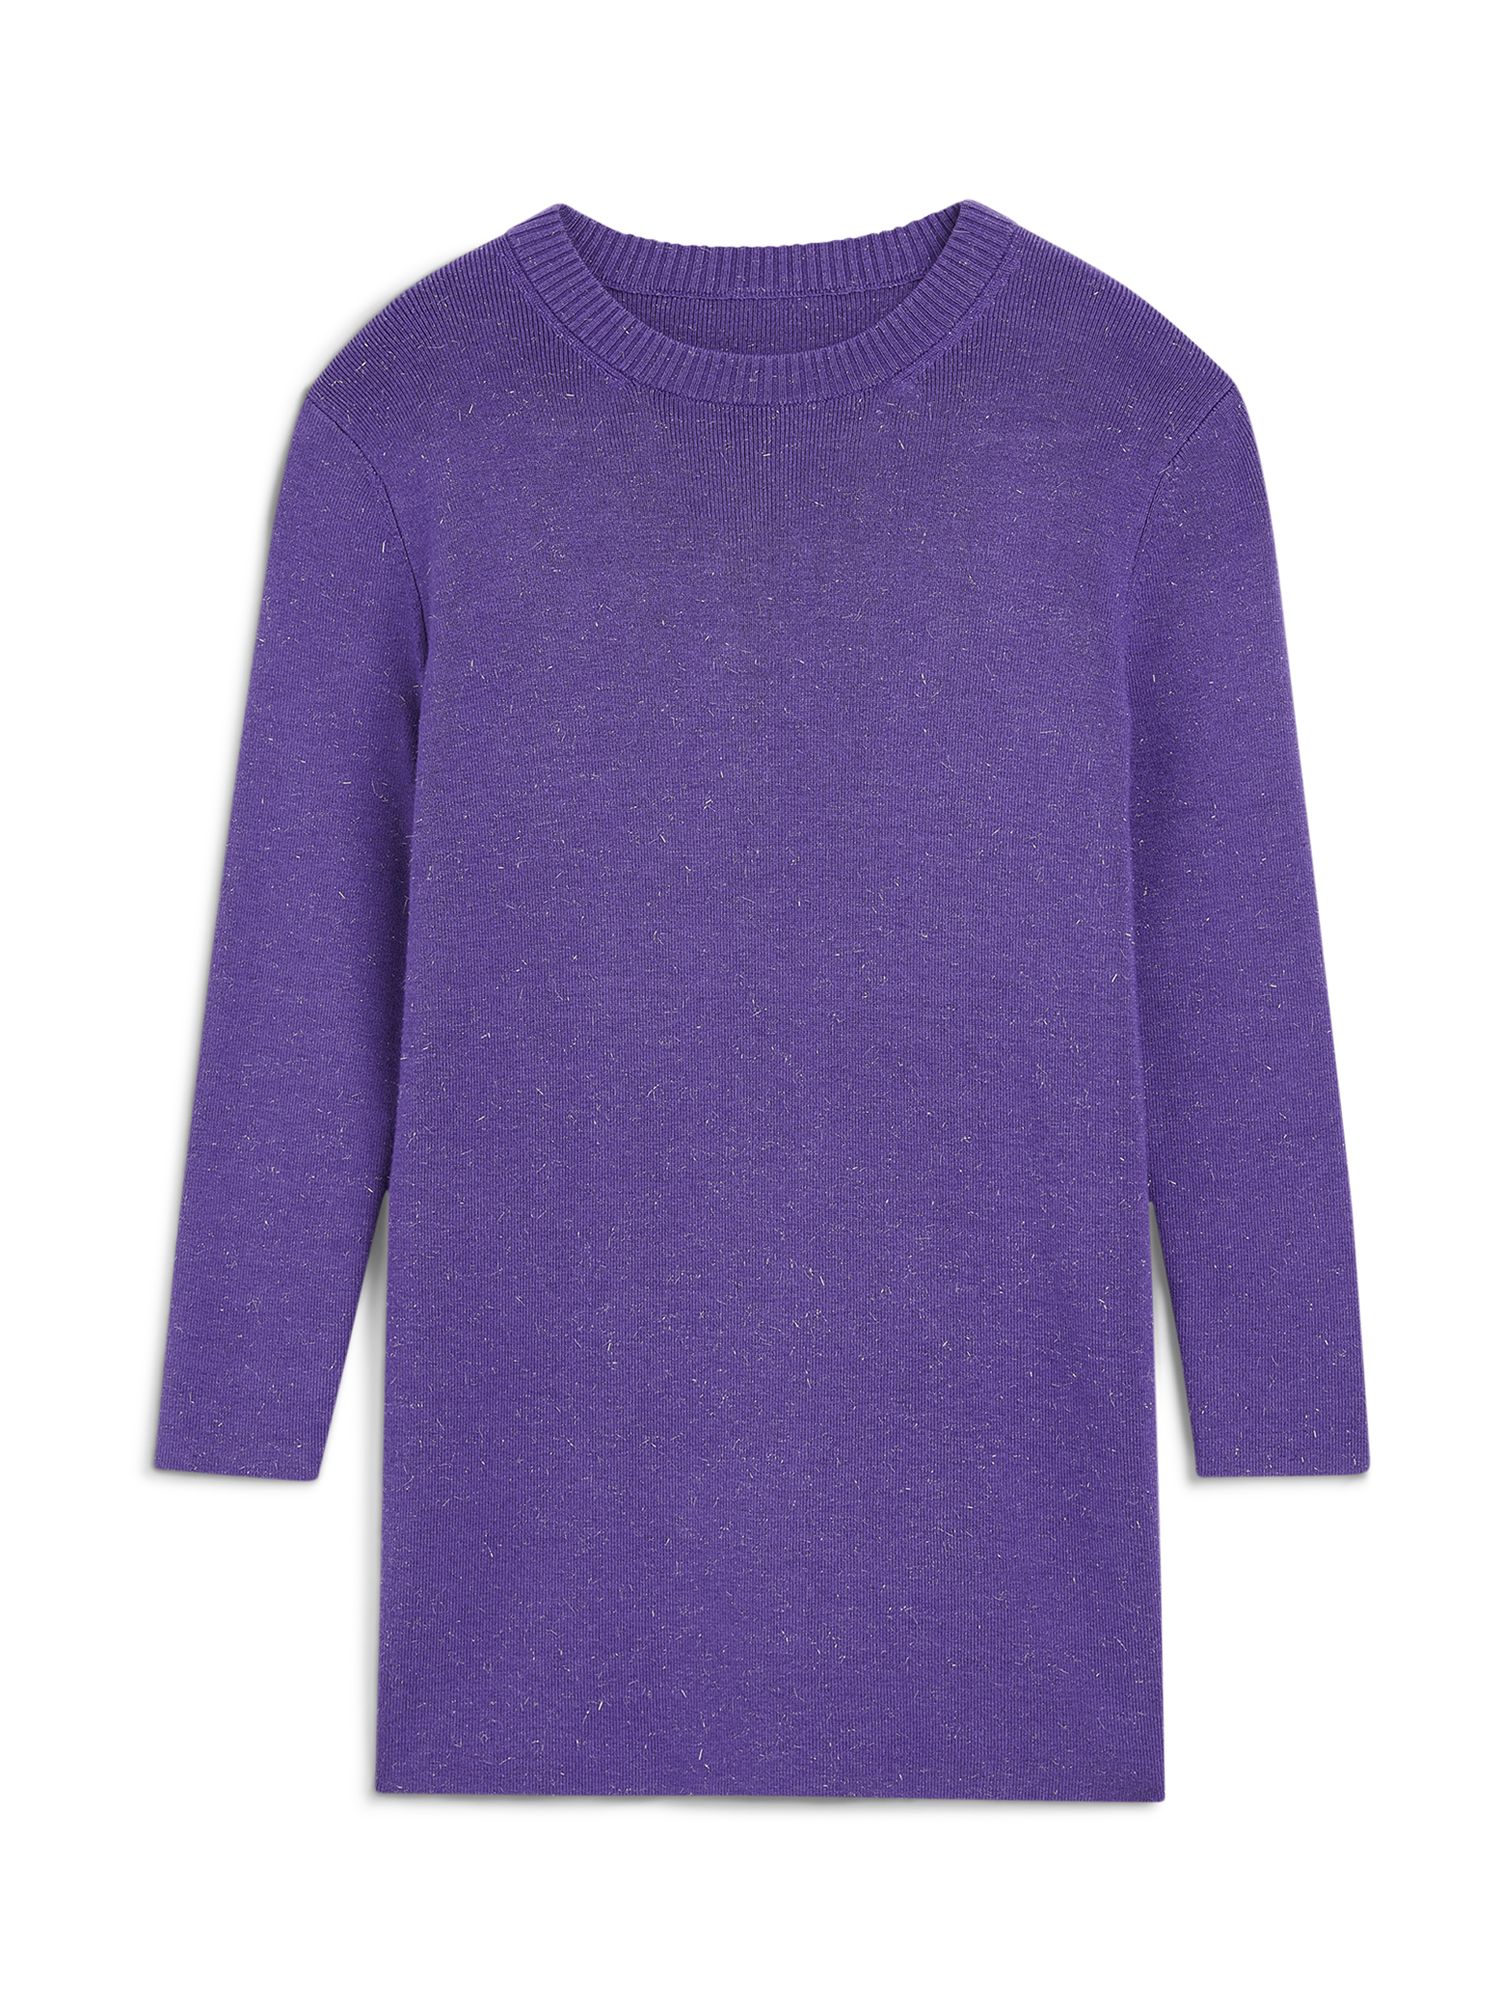 Whistles Kids' Annie Sparkle Knit Dress, Lilac, 3-4 years